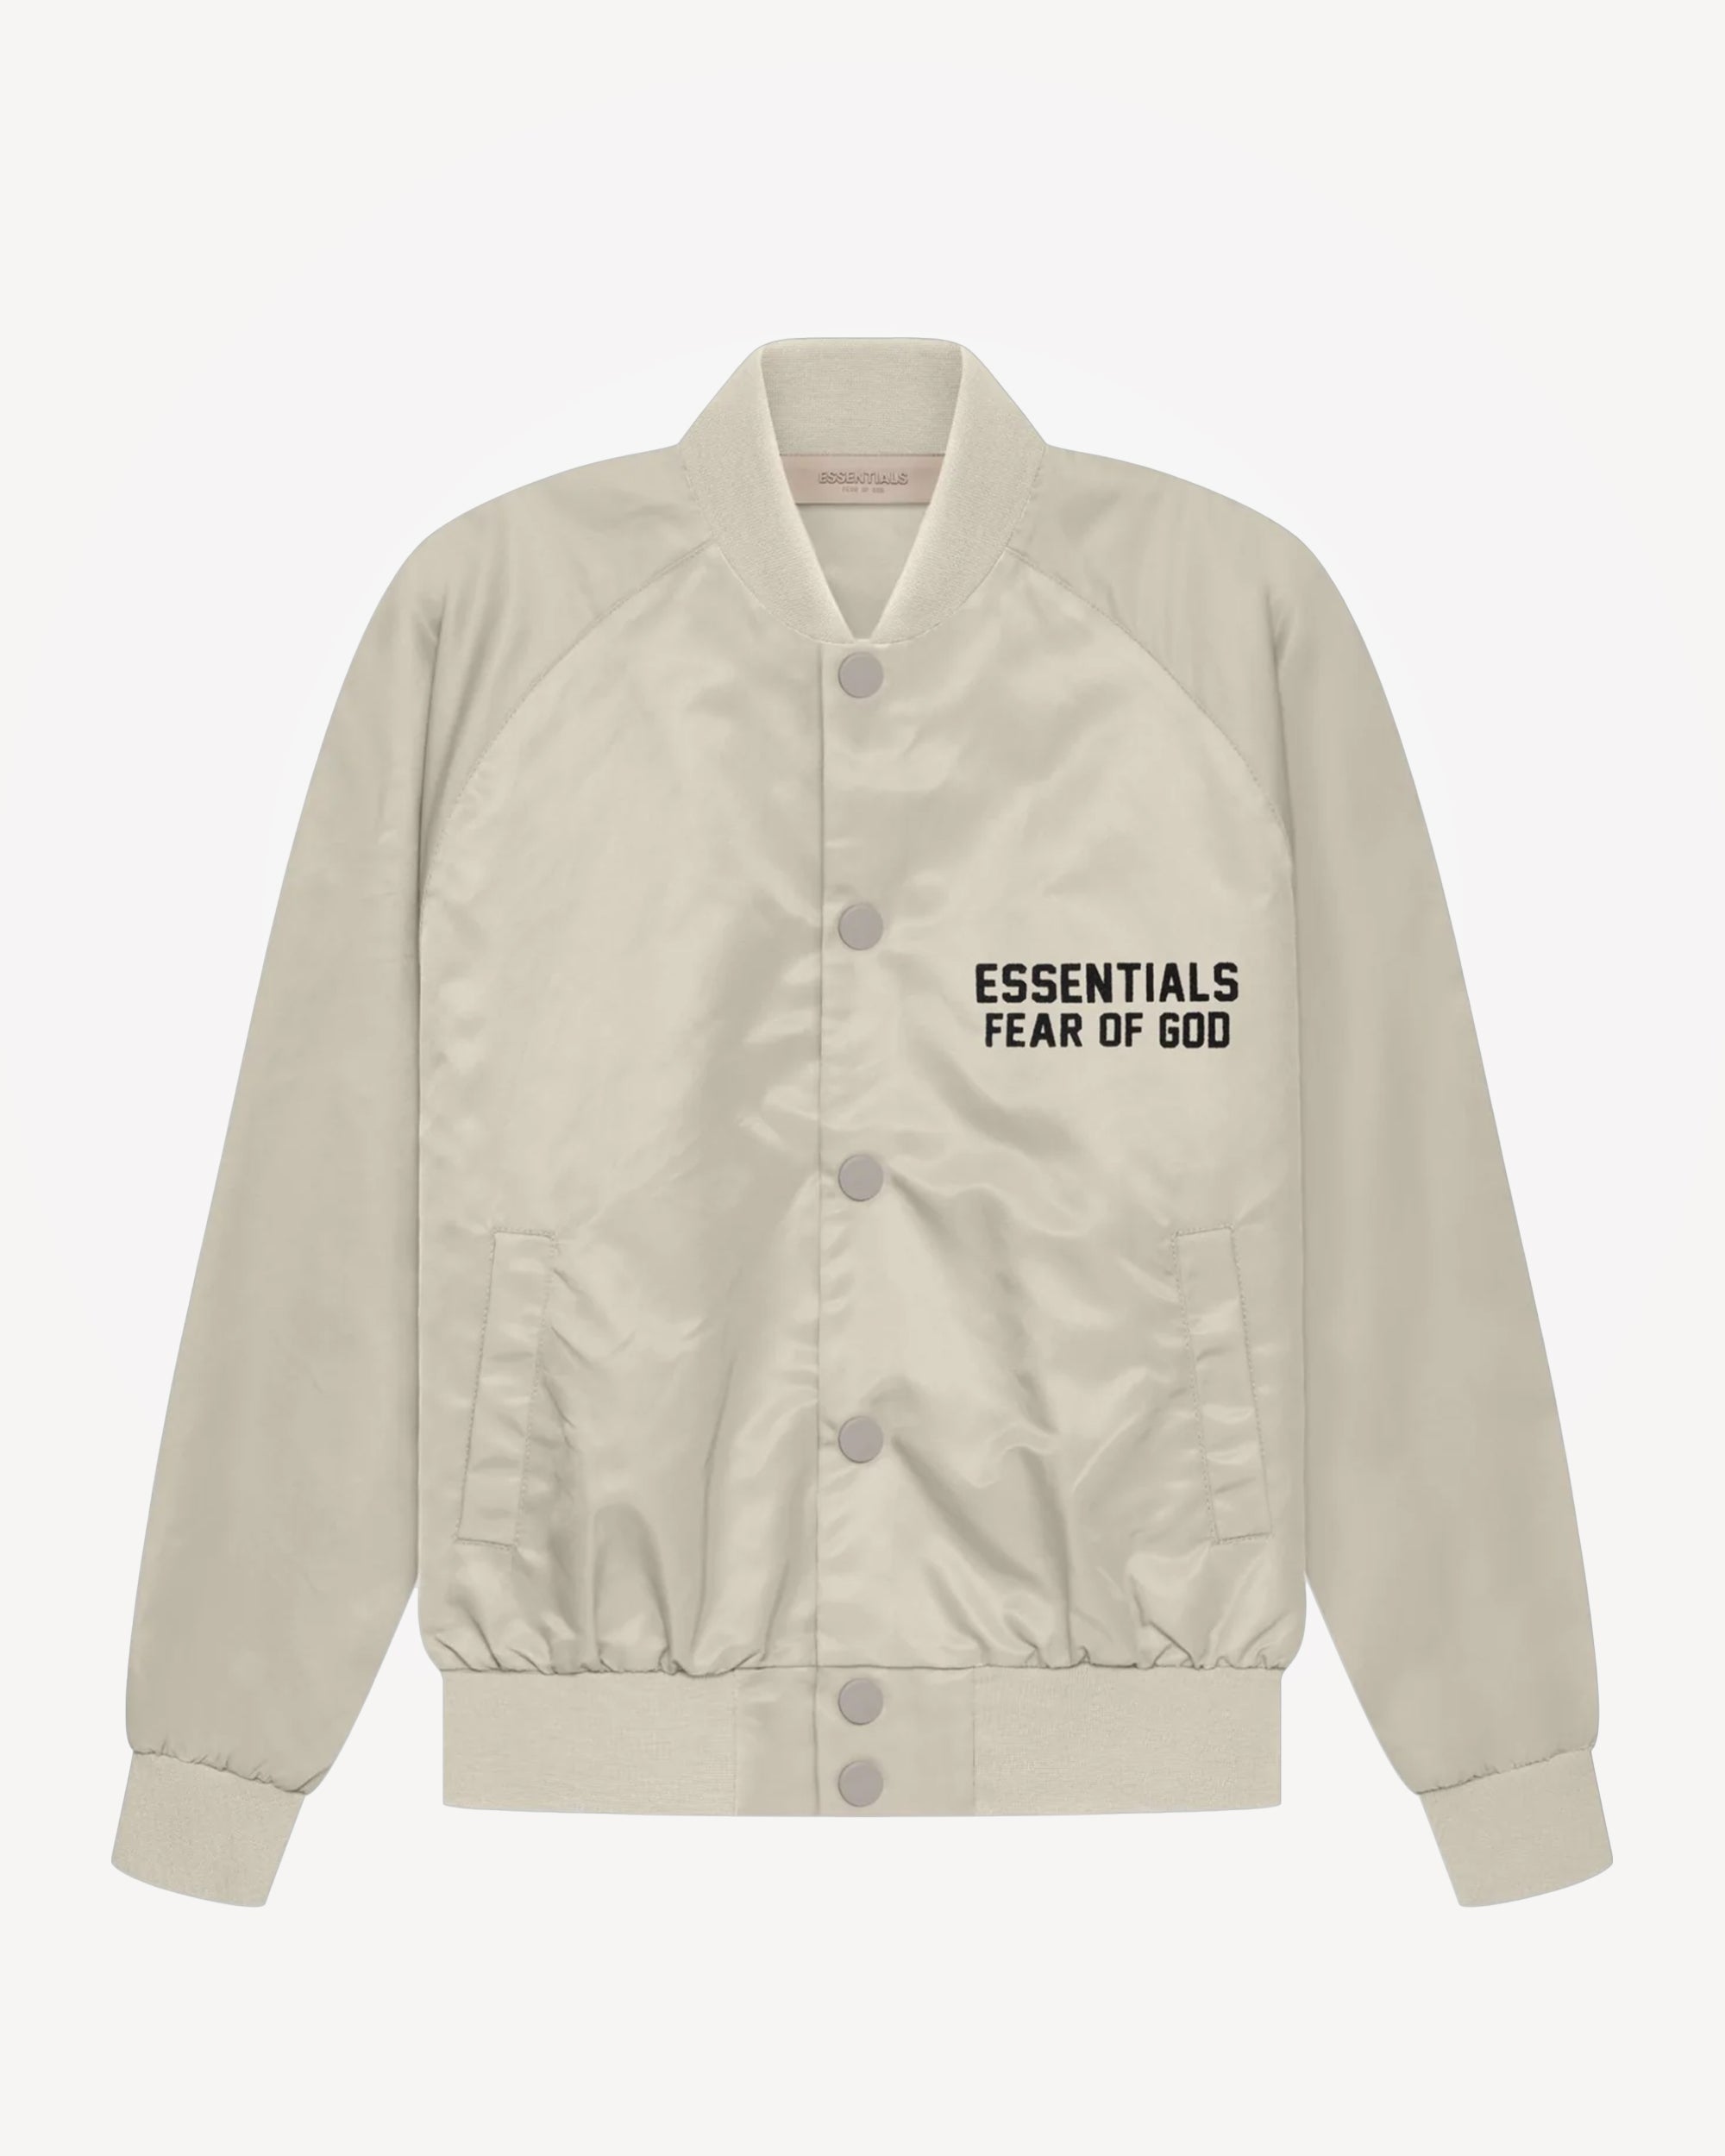 Fear of God Essentials SS22 Collection | Roden Gray